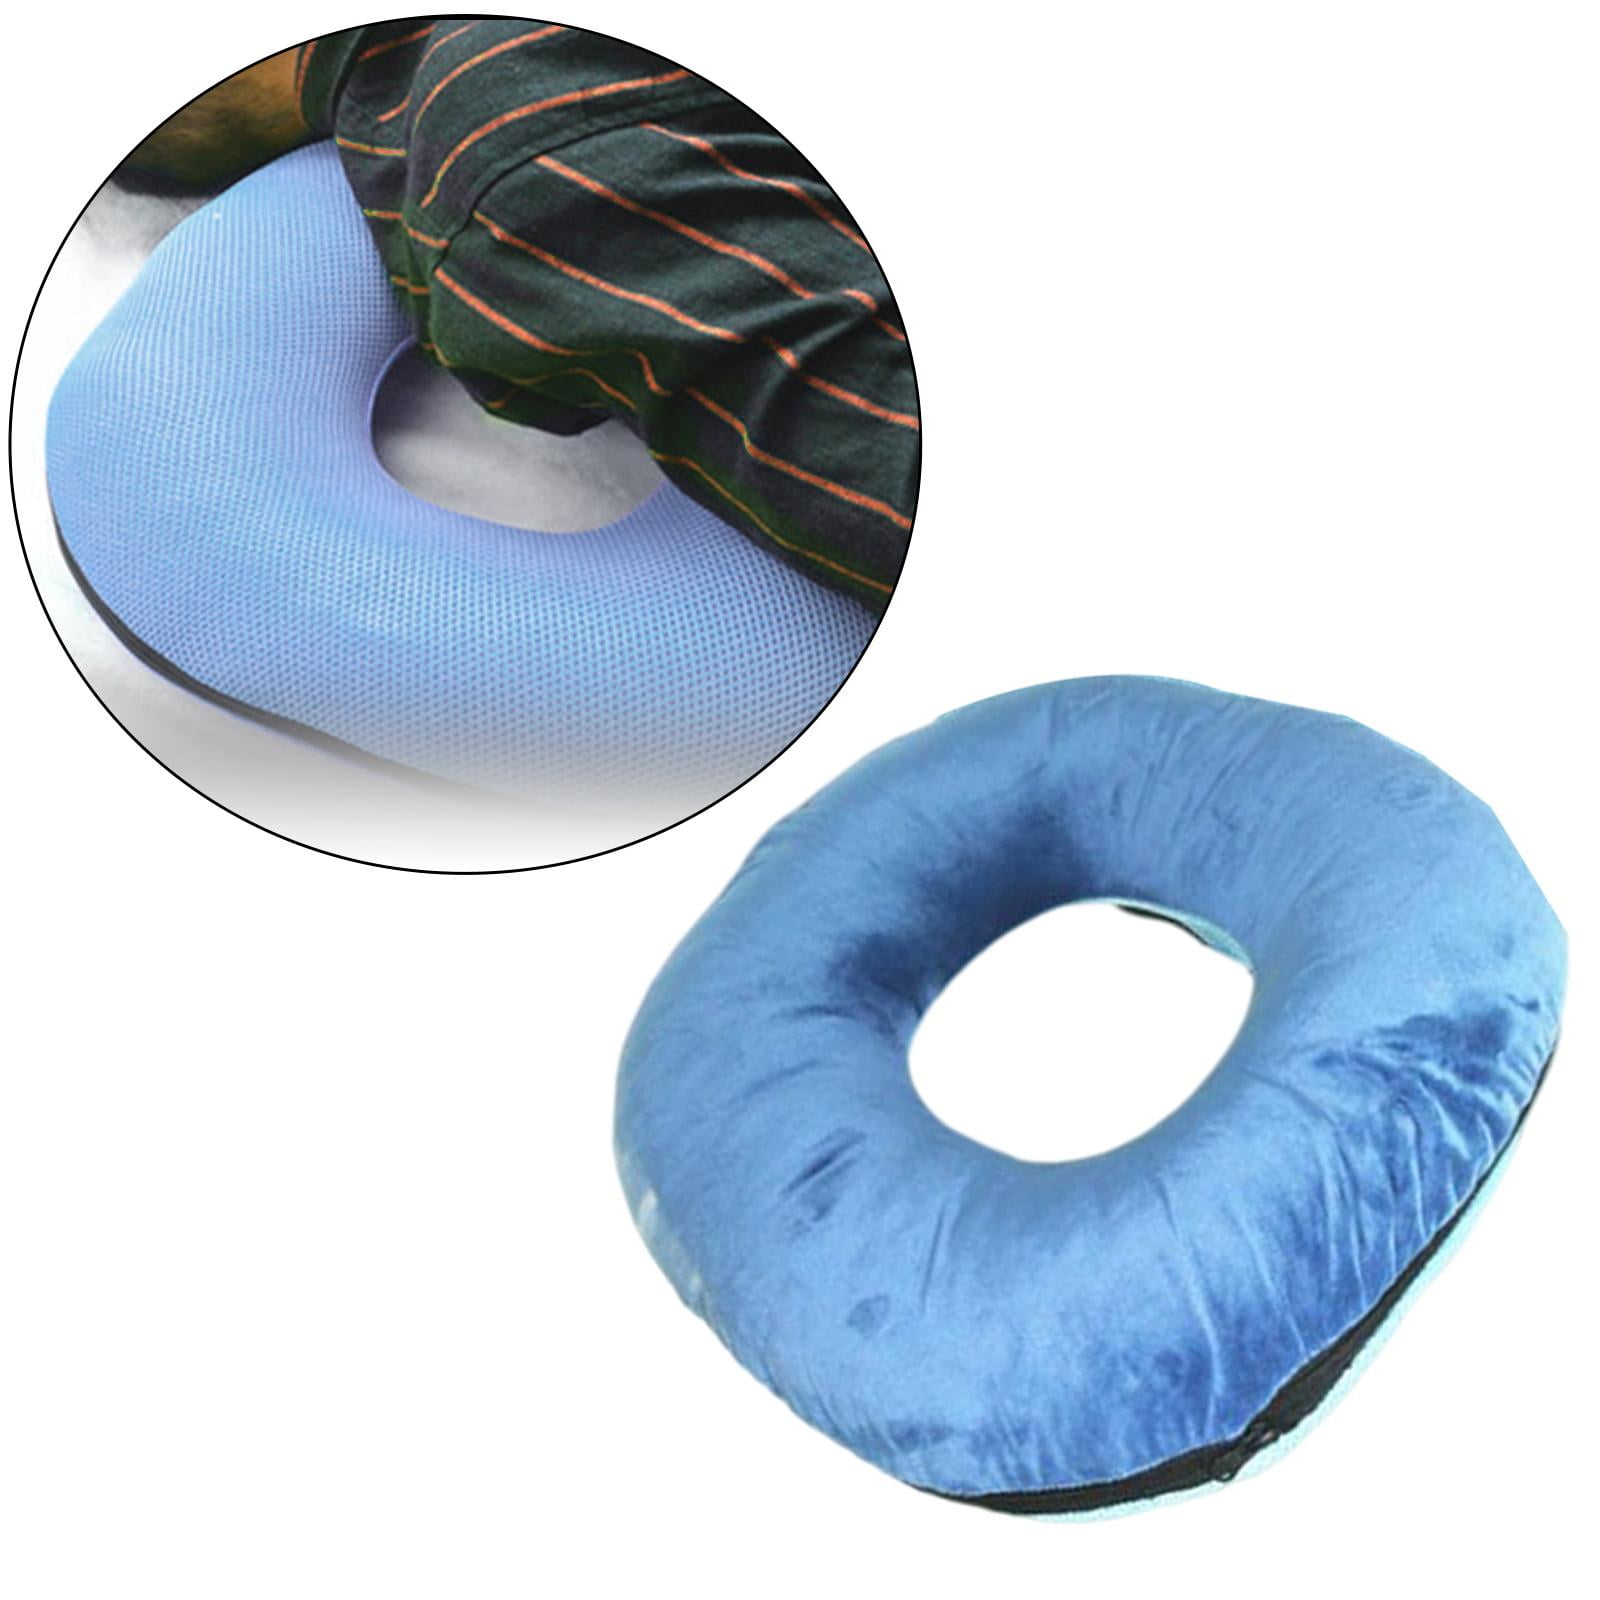 ComfyCloud Donut Cushion Inflatable Ring Cushion - Hemorrhoid Treatment,  Bed Sores, Coccyx & Tailbone Pain, Pilonidal Cyst, Perineal Pain, Child